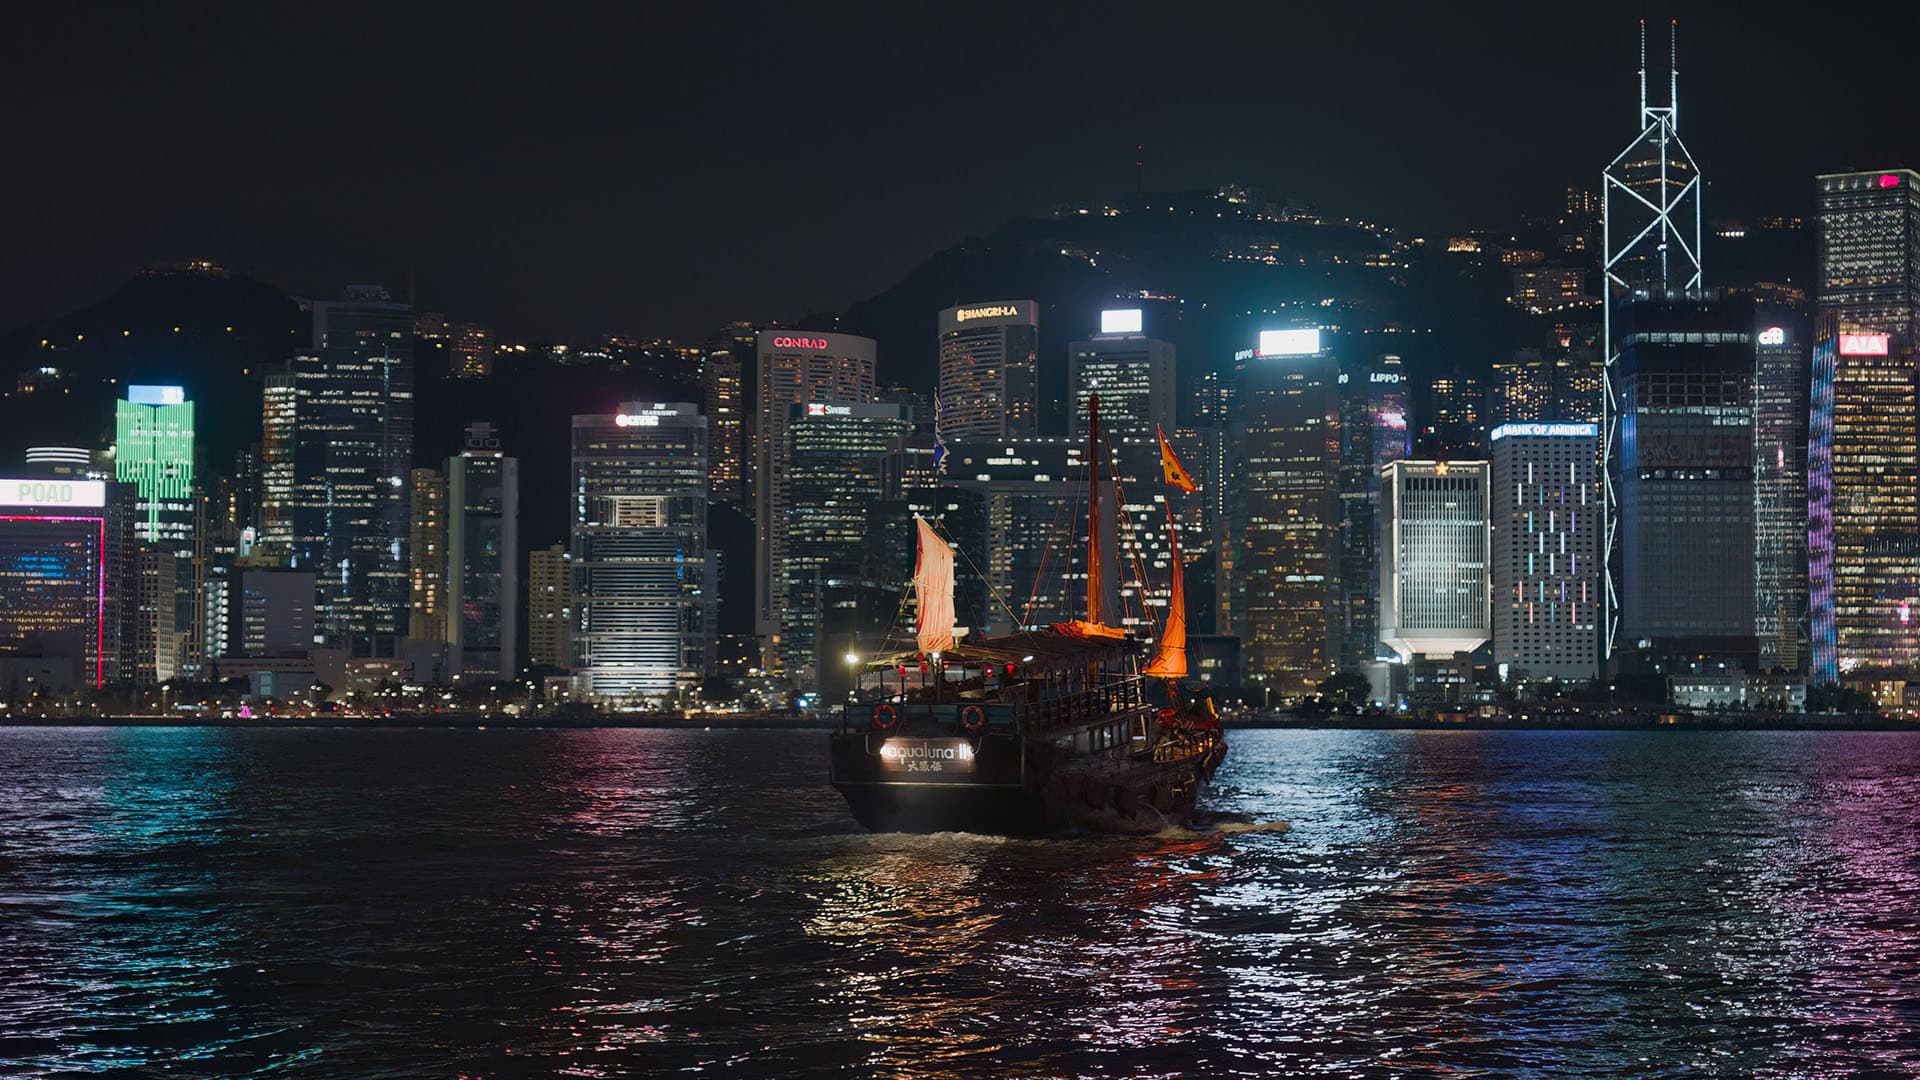 view of a traditional boat along the hong kong skyline